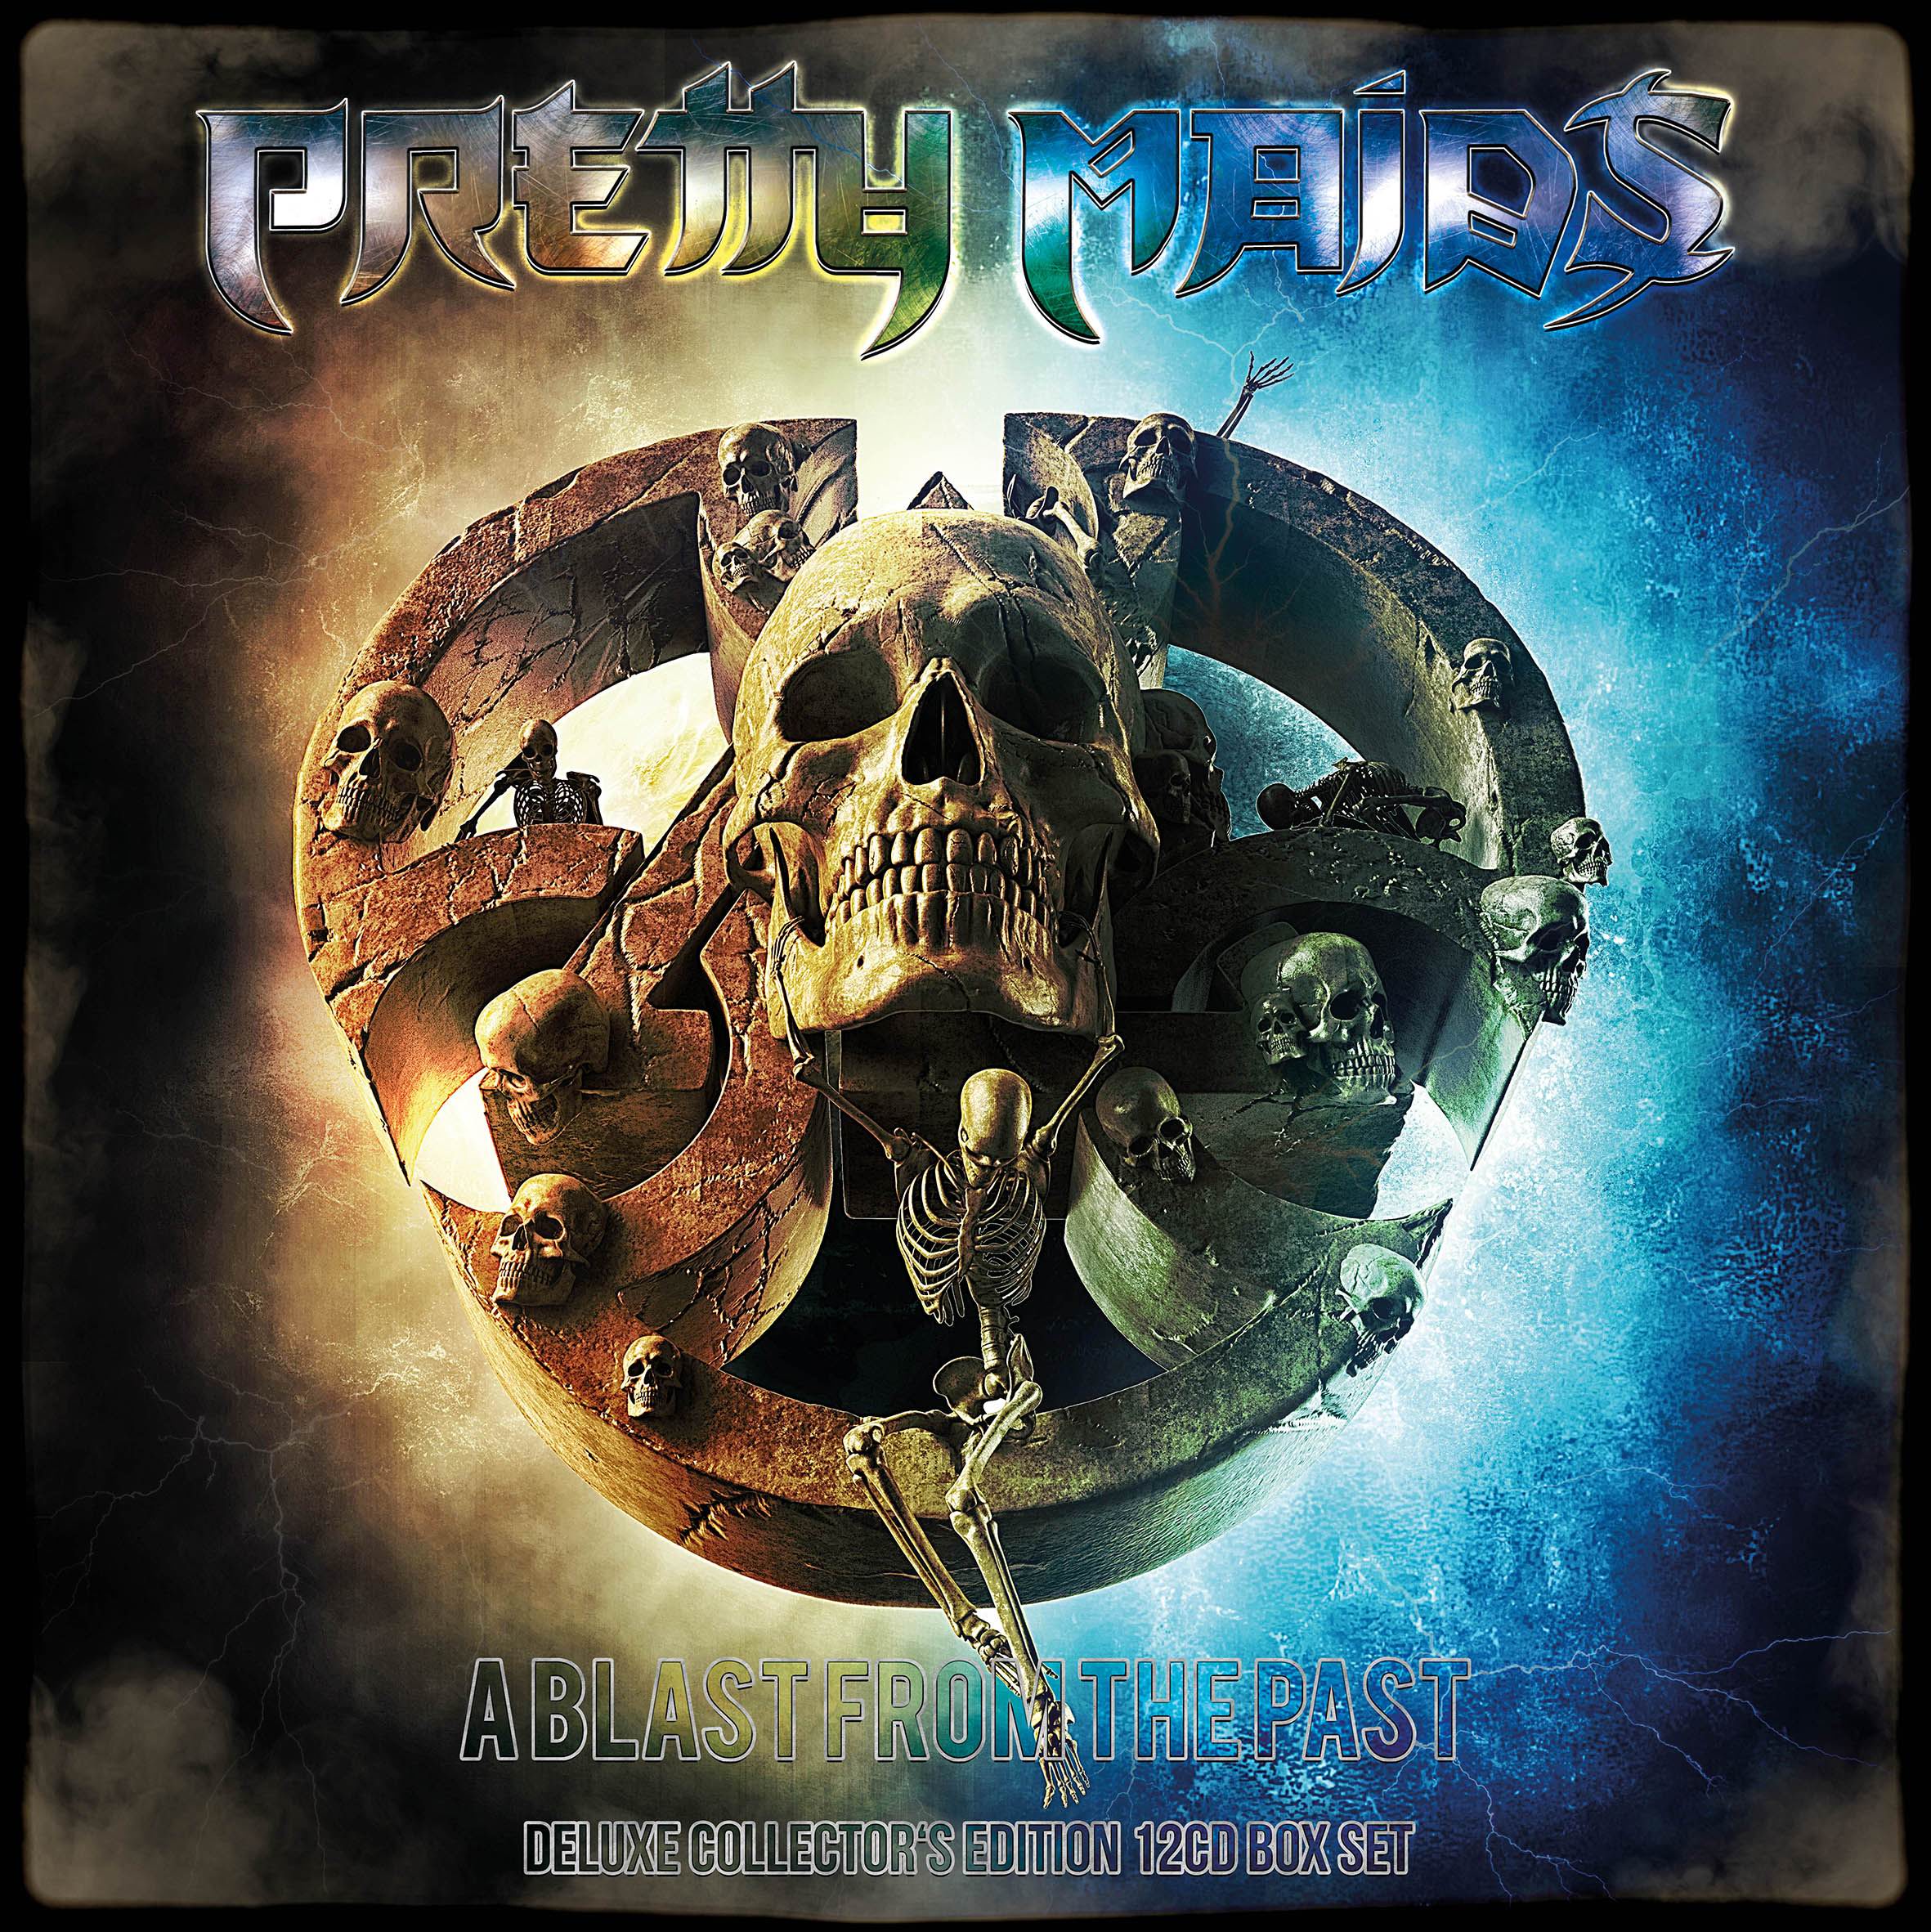 PRETTY MAIDS - “A Blast From The Past ”